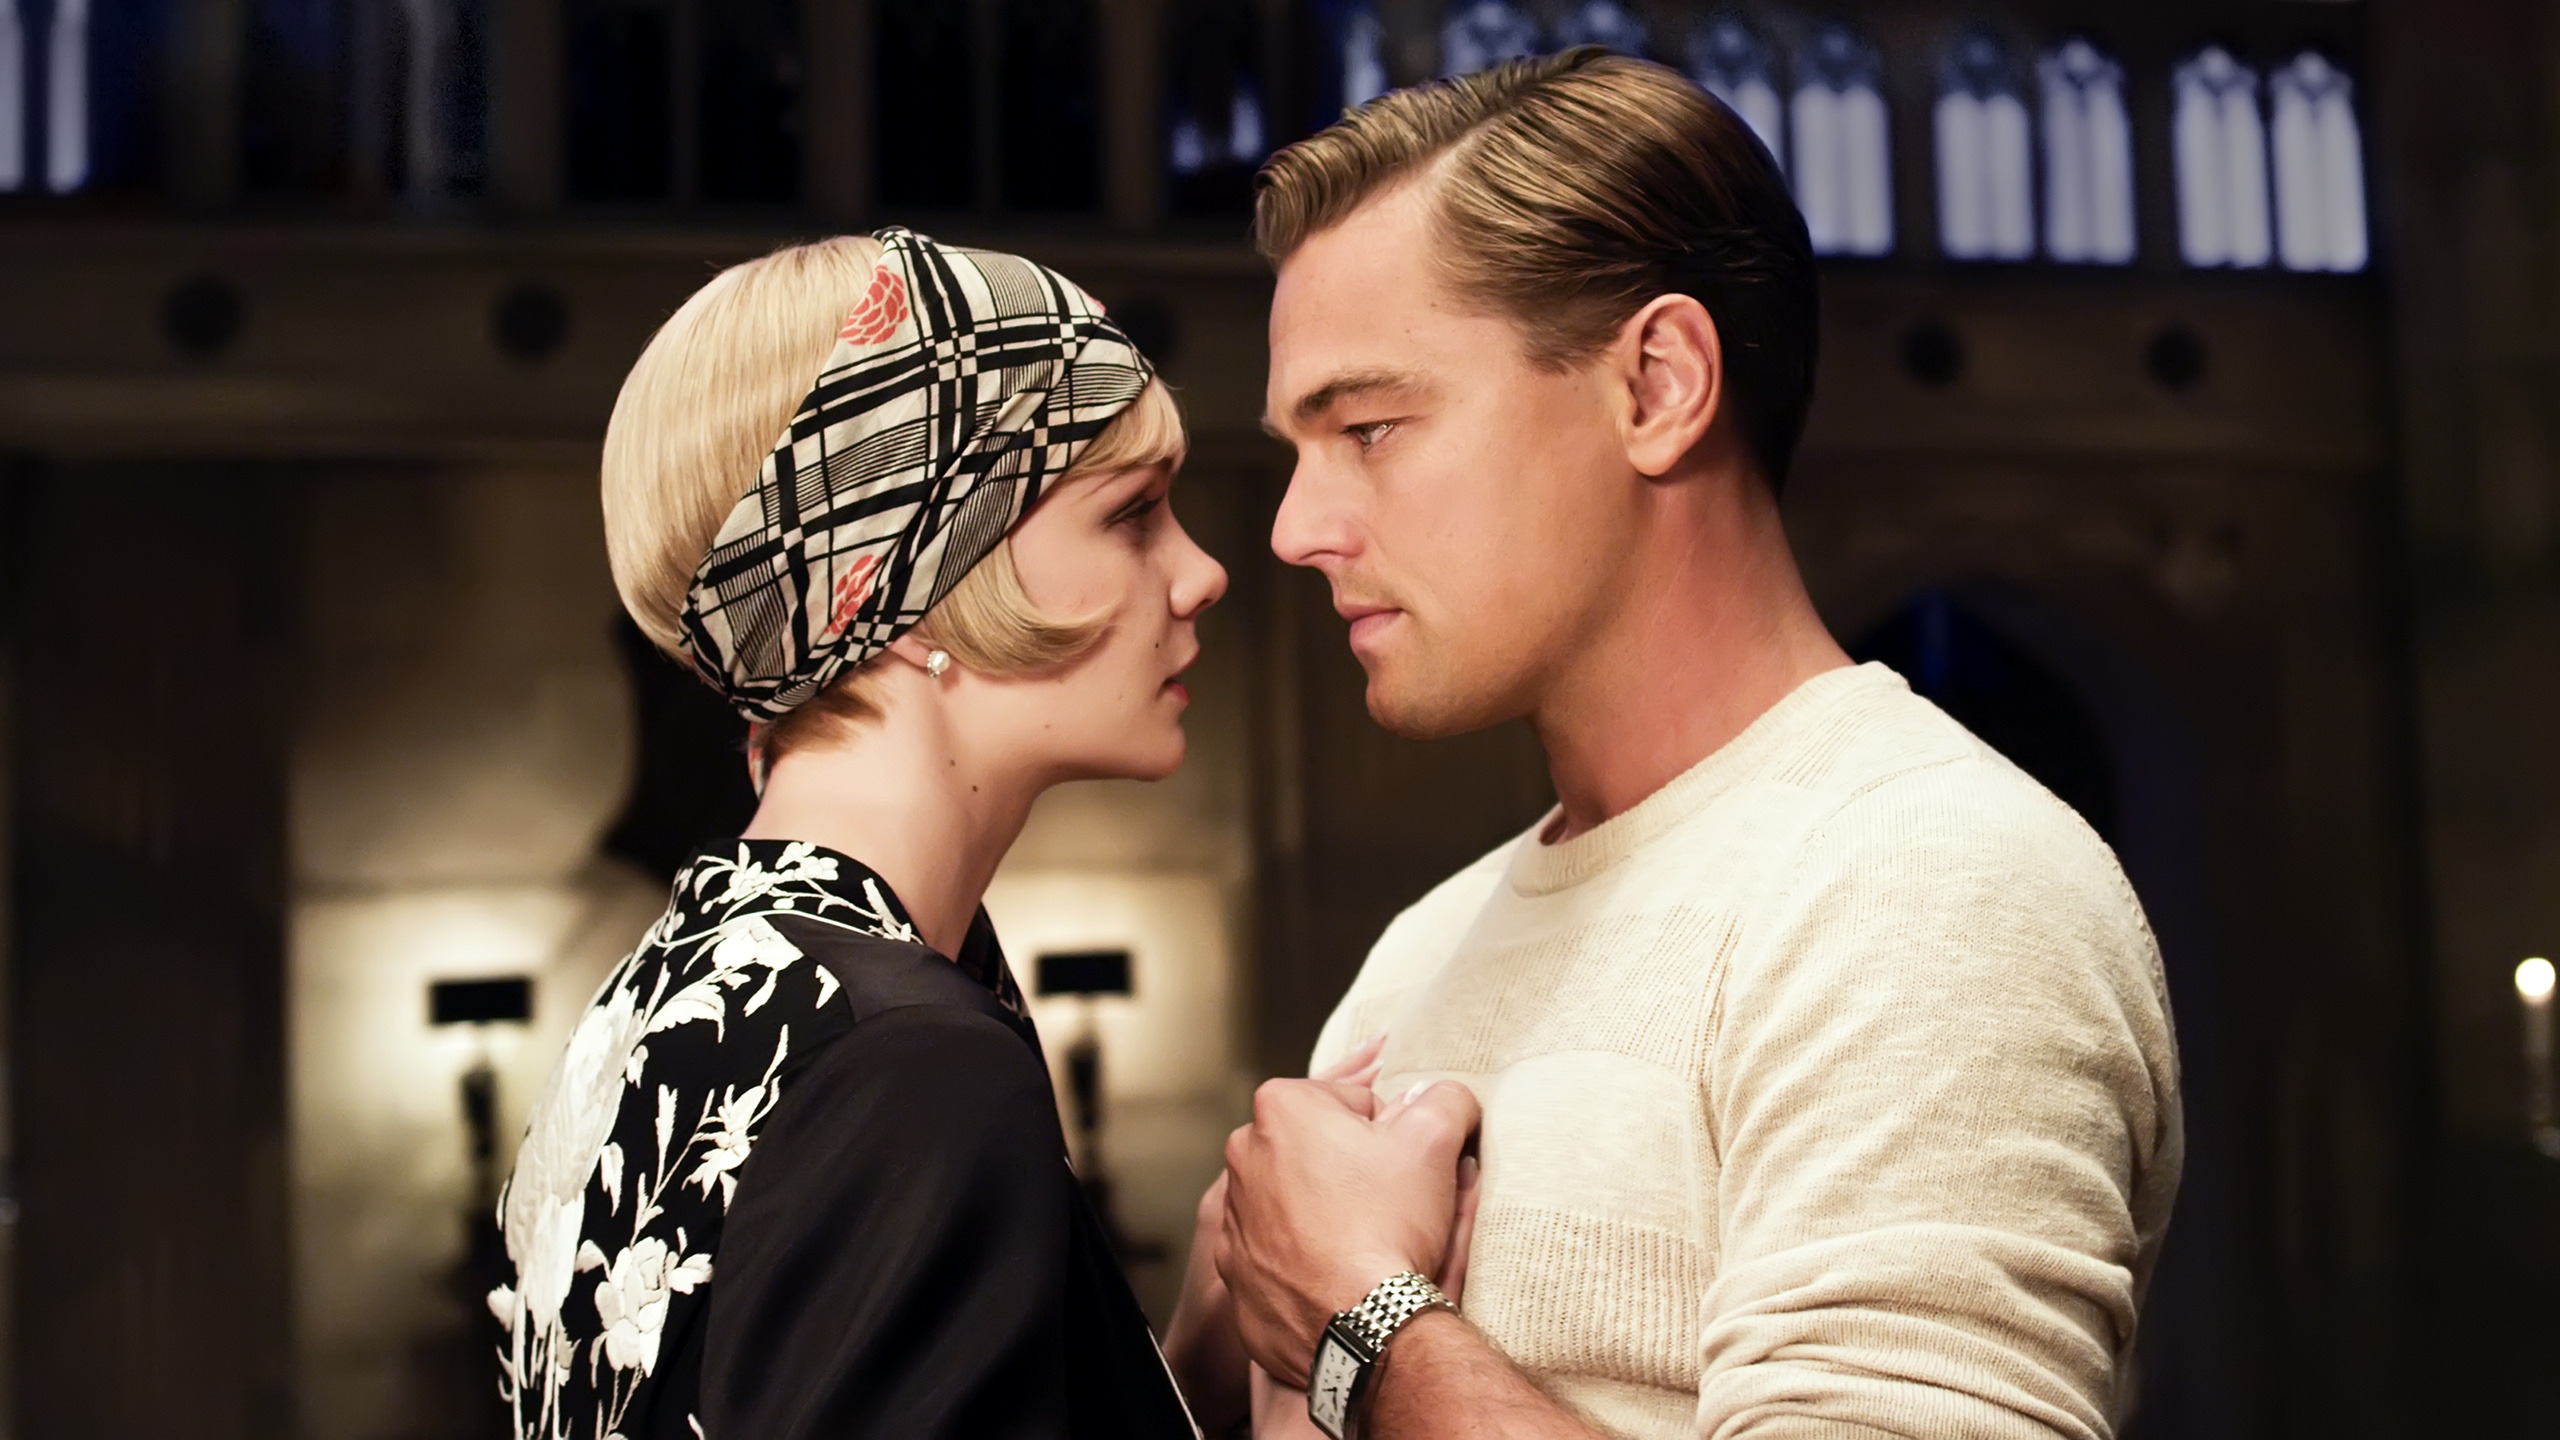 The Great Gatsby for 2560x1440 HDTV resolution